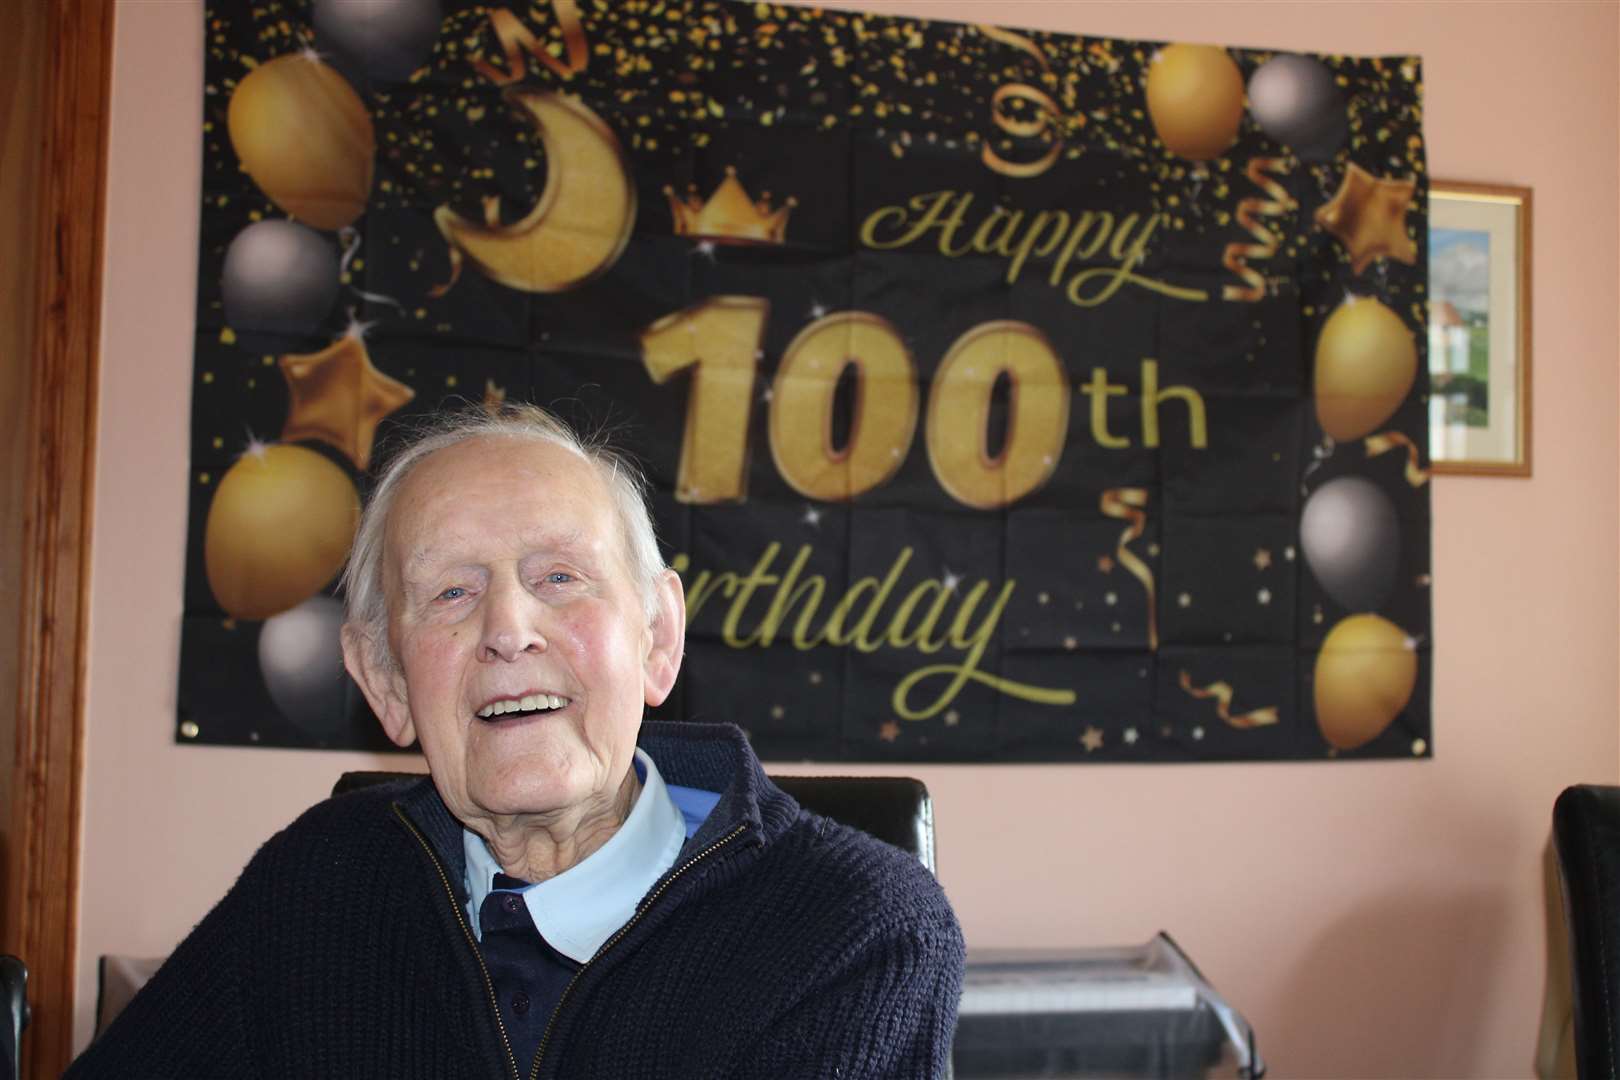 Andrew Aitken celebrated his 100th birthday at a family party.